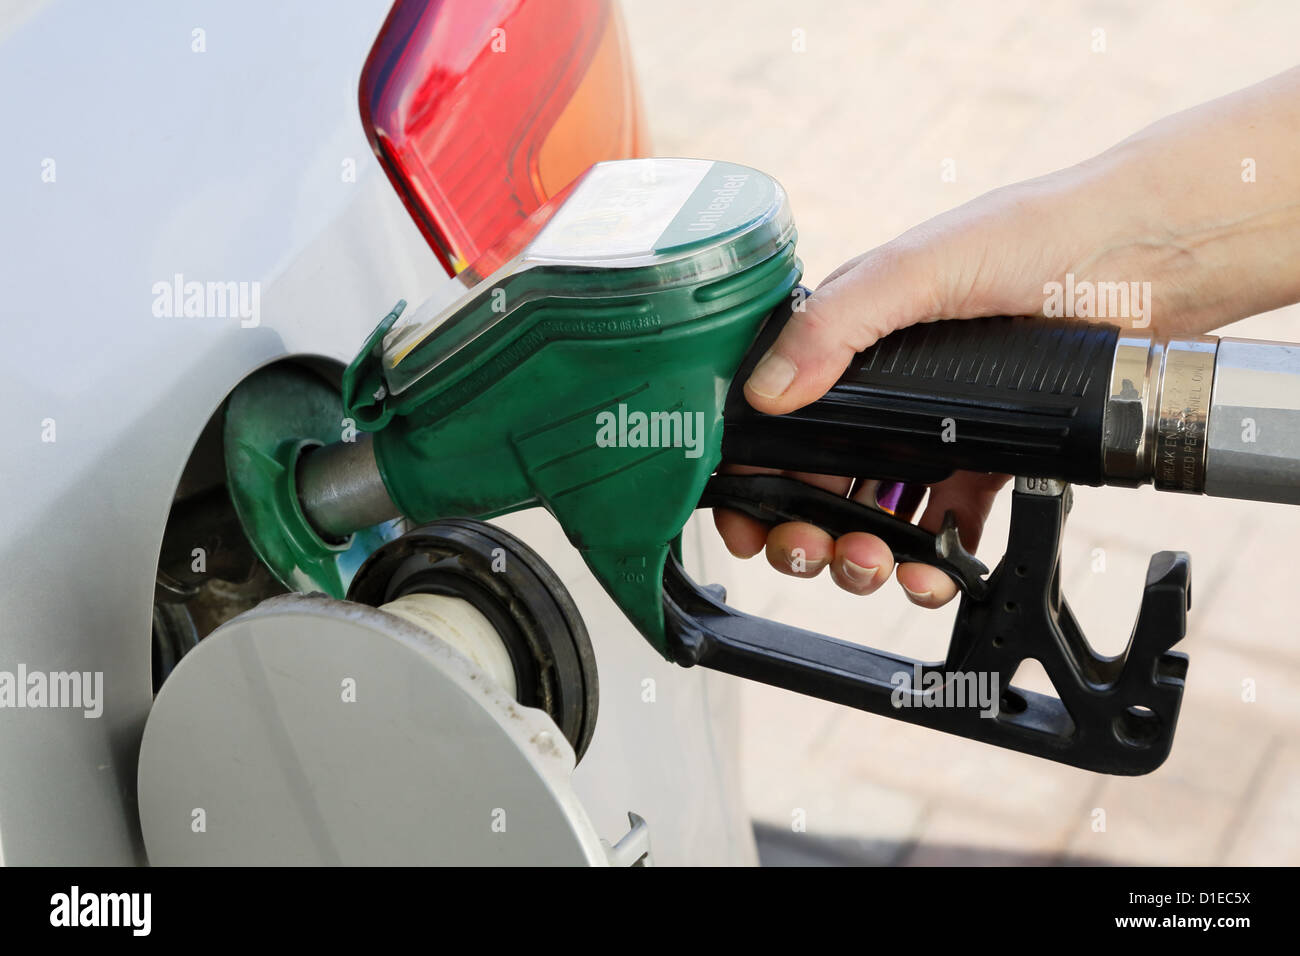 Filling car with petrol. Stock Photo